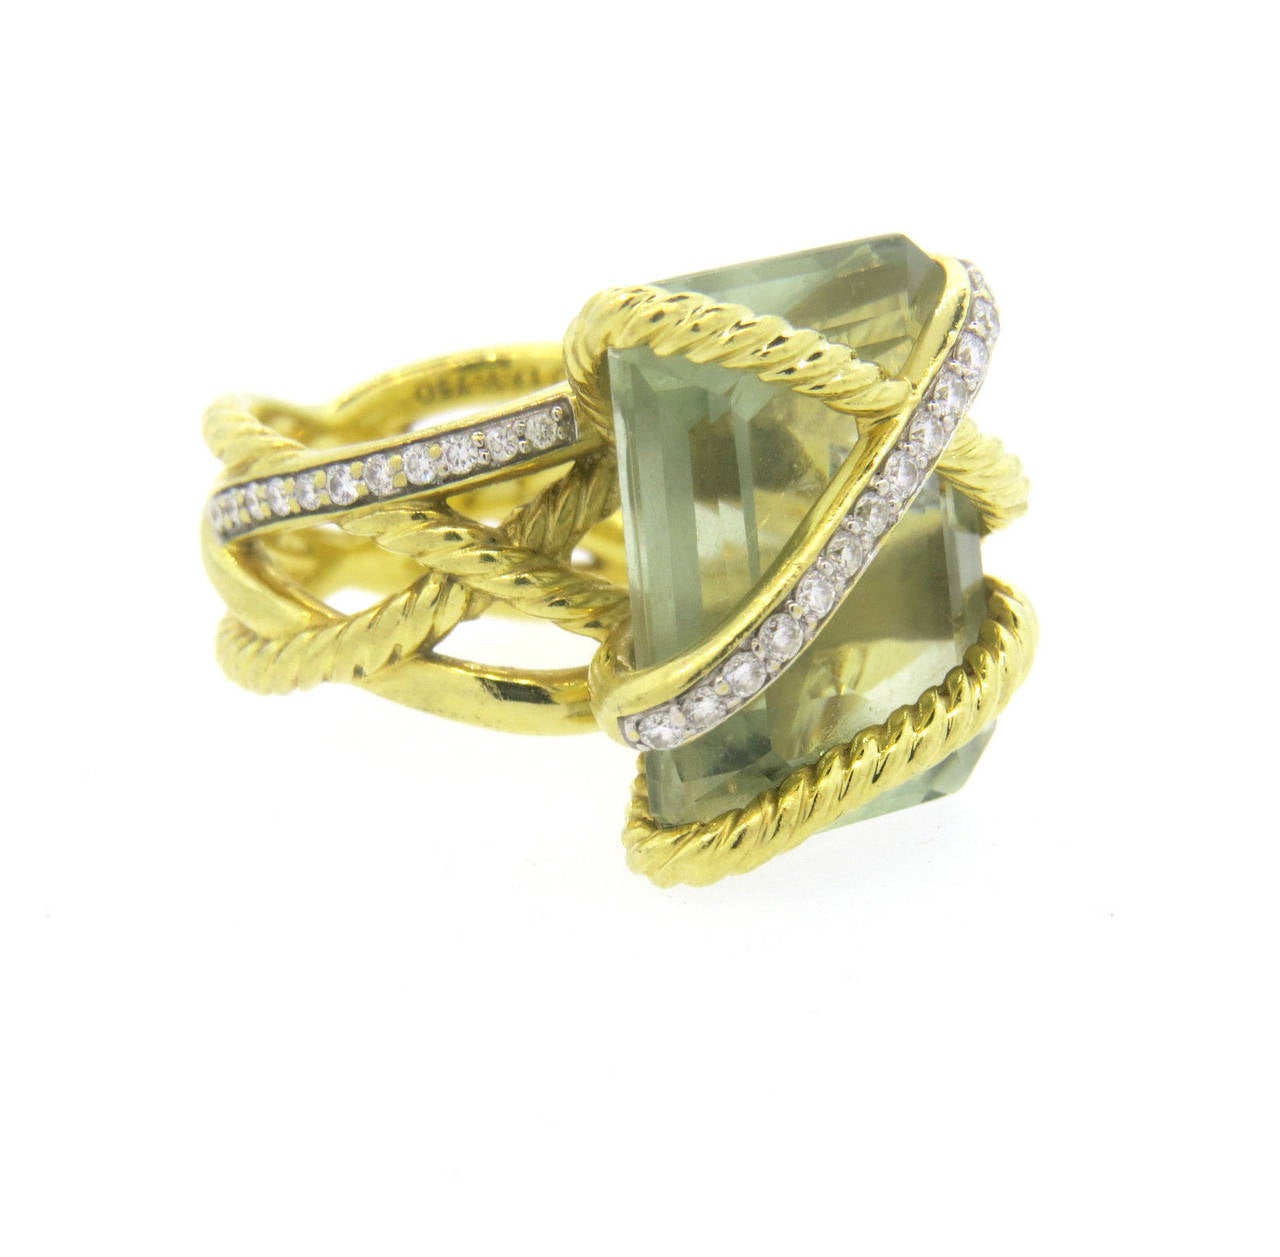 18k yellow gold ring, crafted by David Yurman for Cable Wrap collection, featuring 20mm x 15mm prasiolite stone, surrounded with 0.44ctw in diamonds. Ring is a size 7, marked 750 and D.Y., Weight of the piece - 22.5 grams